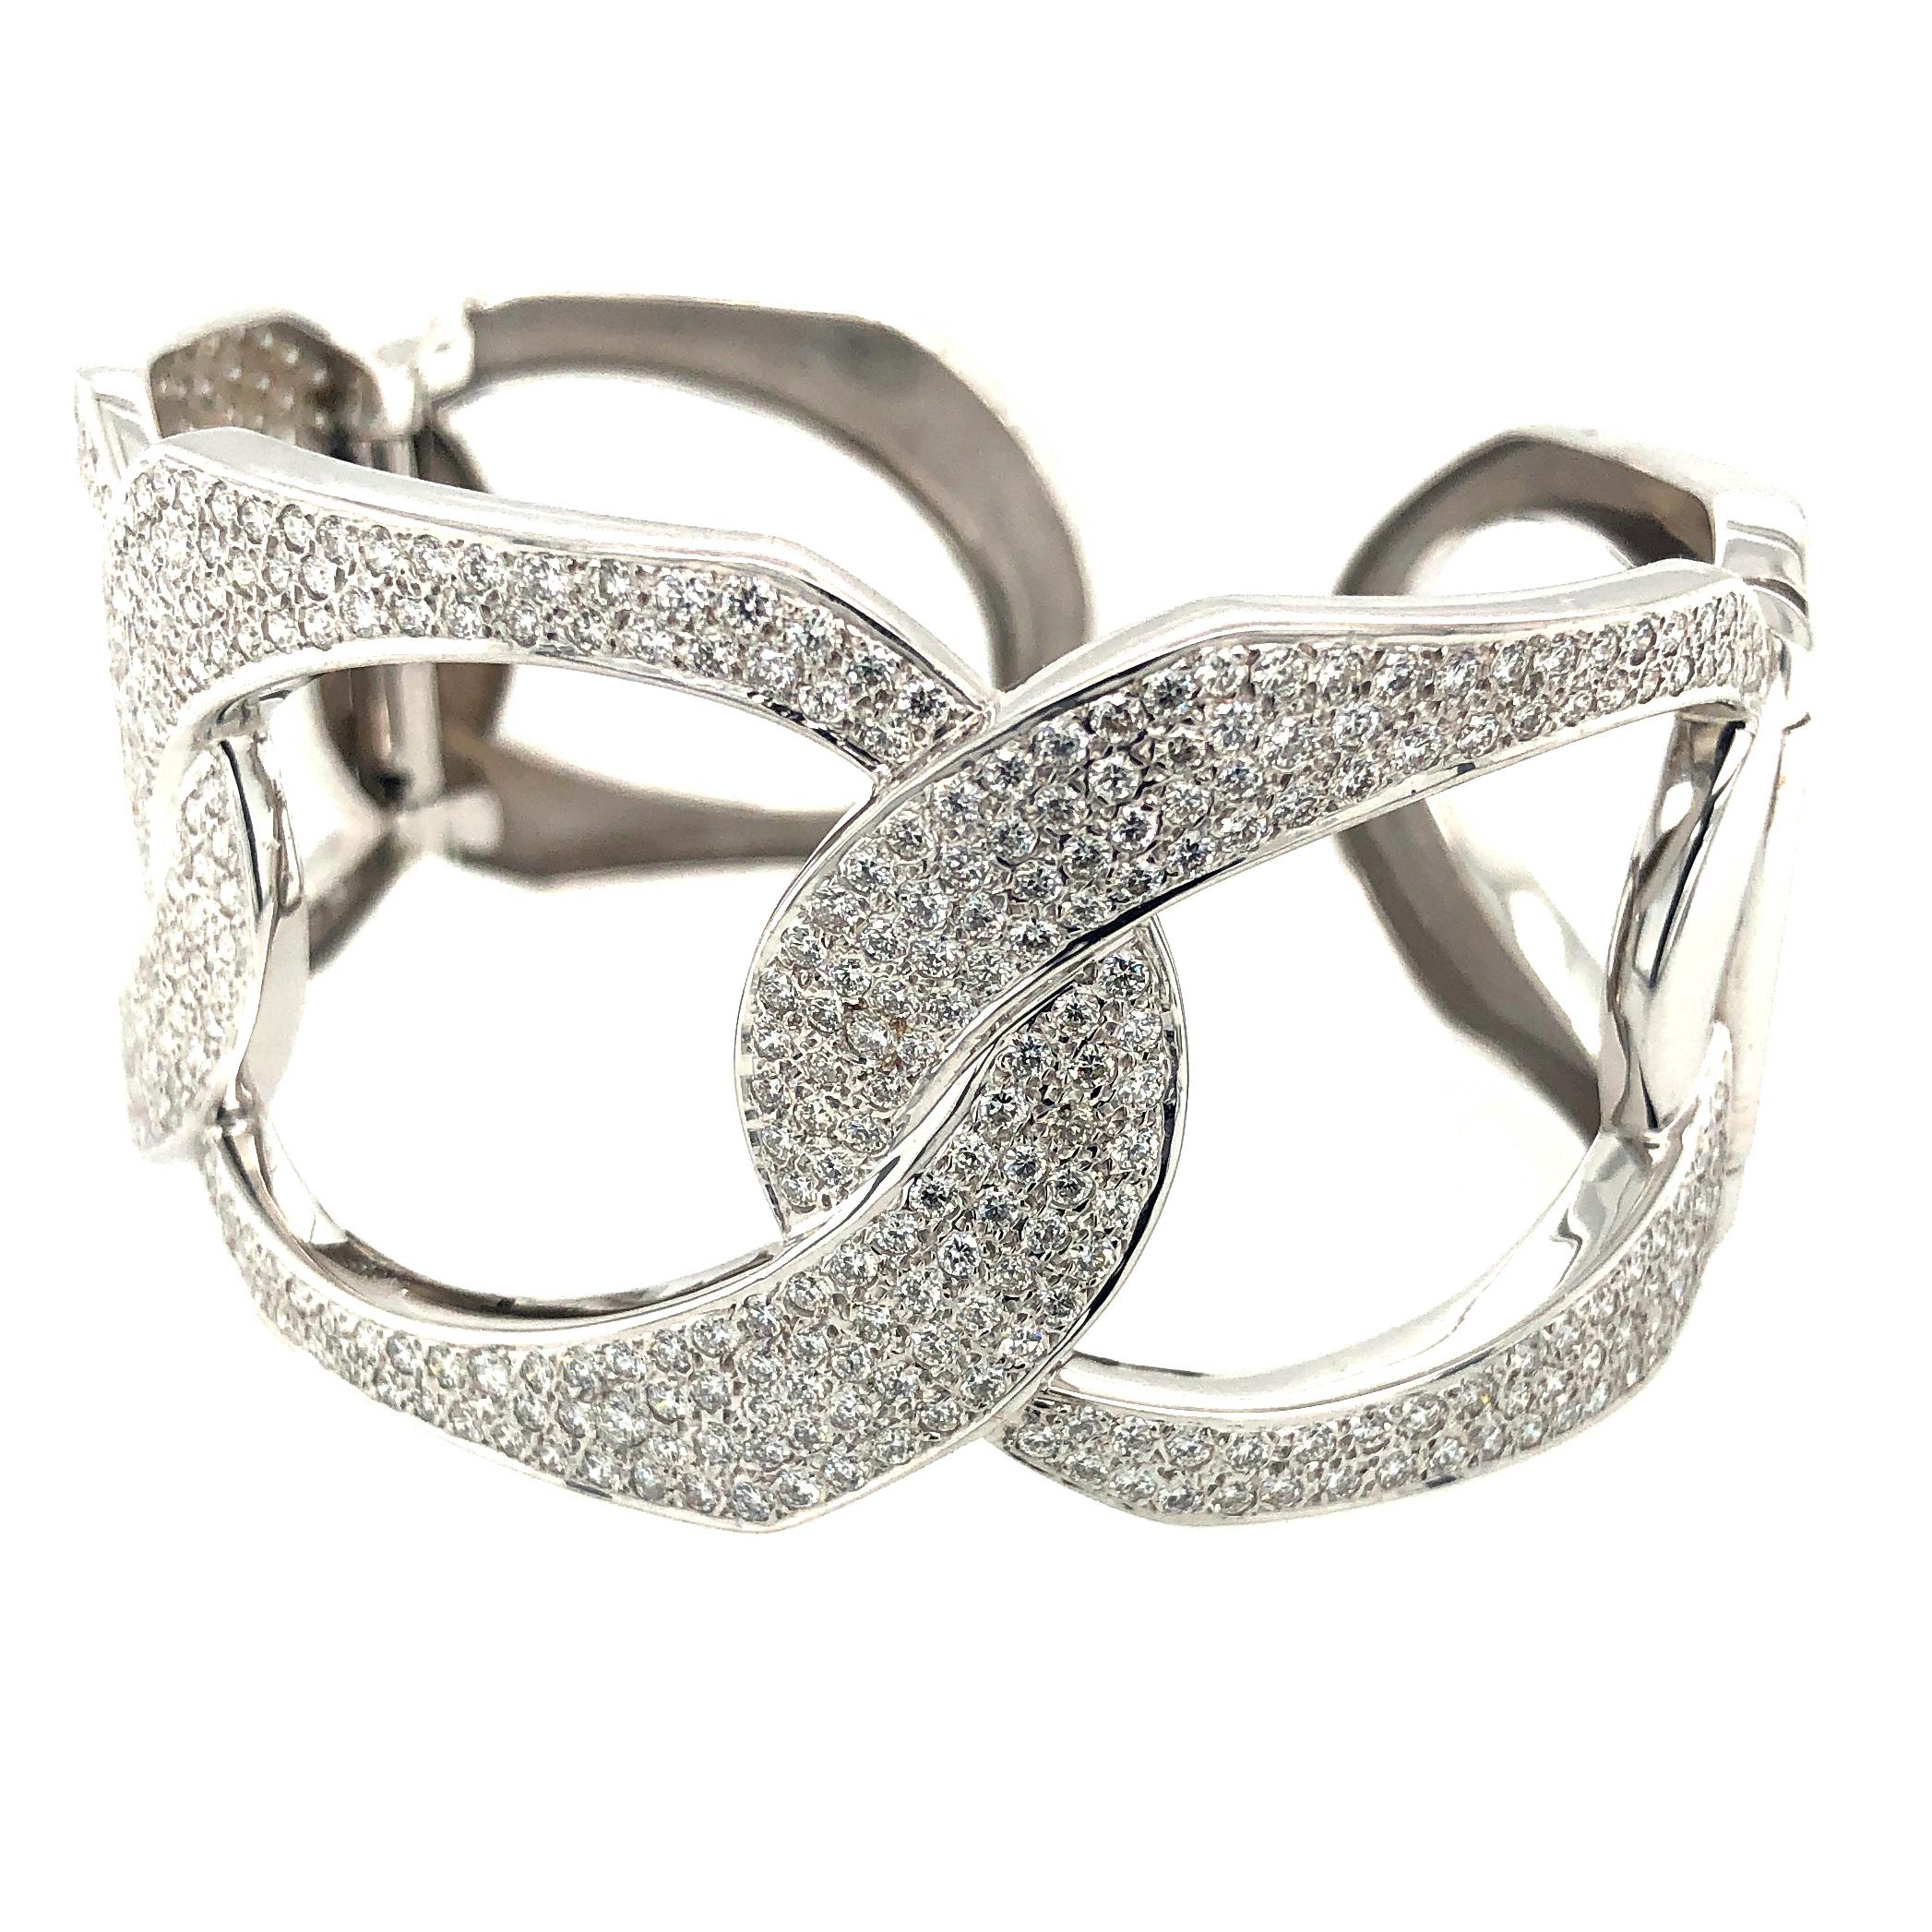  Show Source Images

Offered here is a beautiful large cuff bangle with diamonds set in white gold. The cuff has two ( 2 ) hinges so its easy to put on and take off. The cuff has natural round brilliant cut diamonds G-H color Vs2 in clarity with an